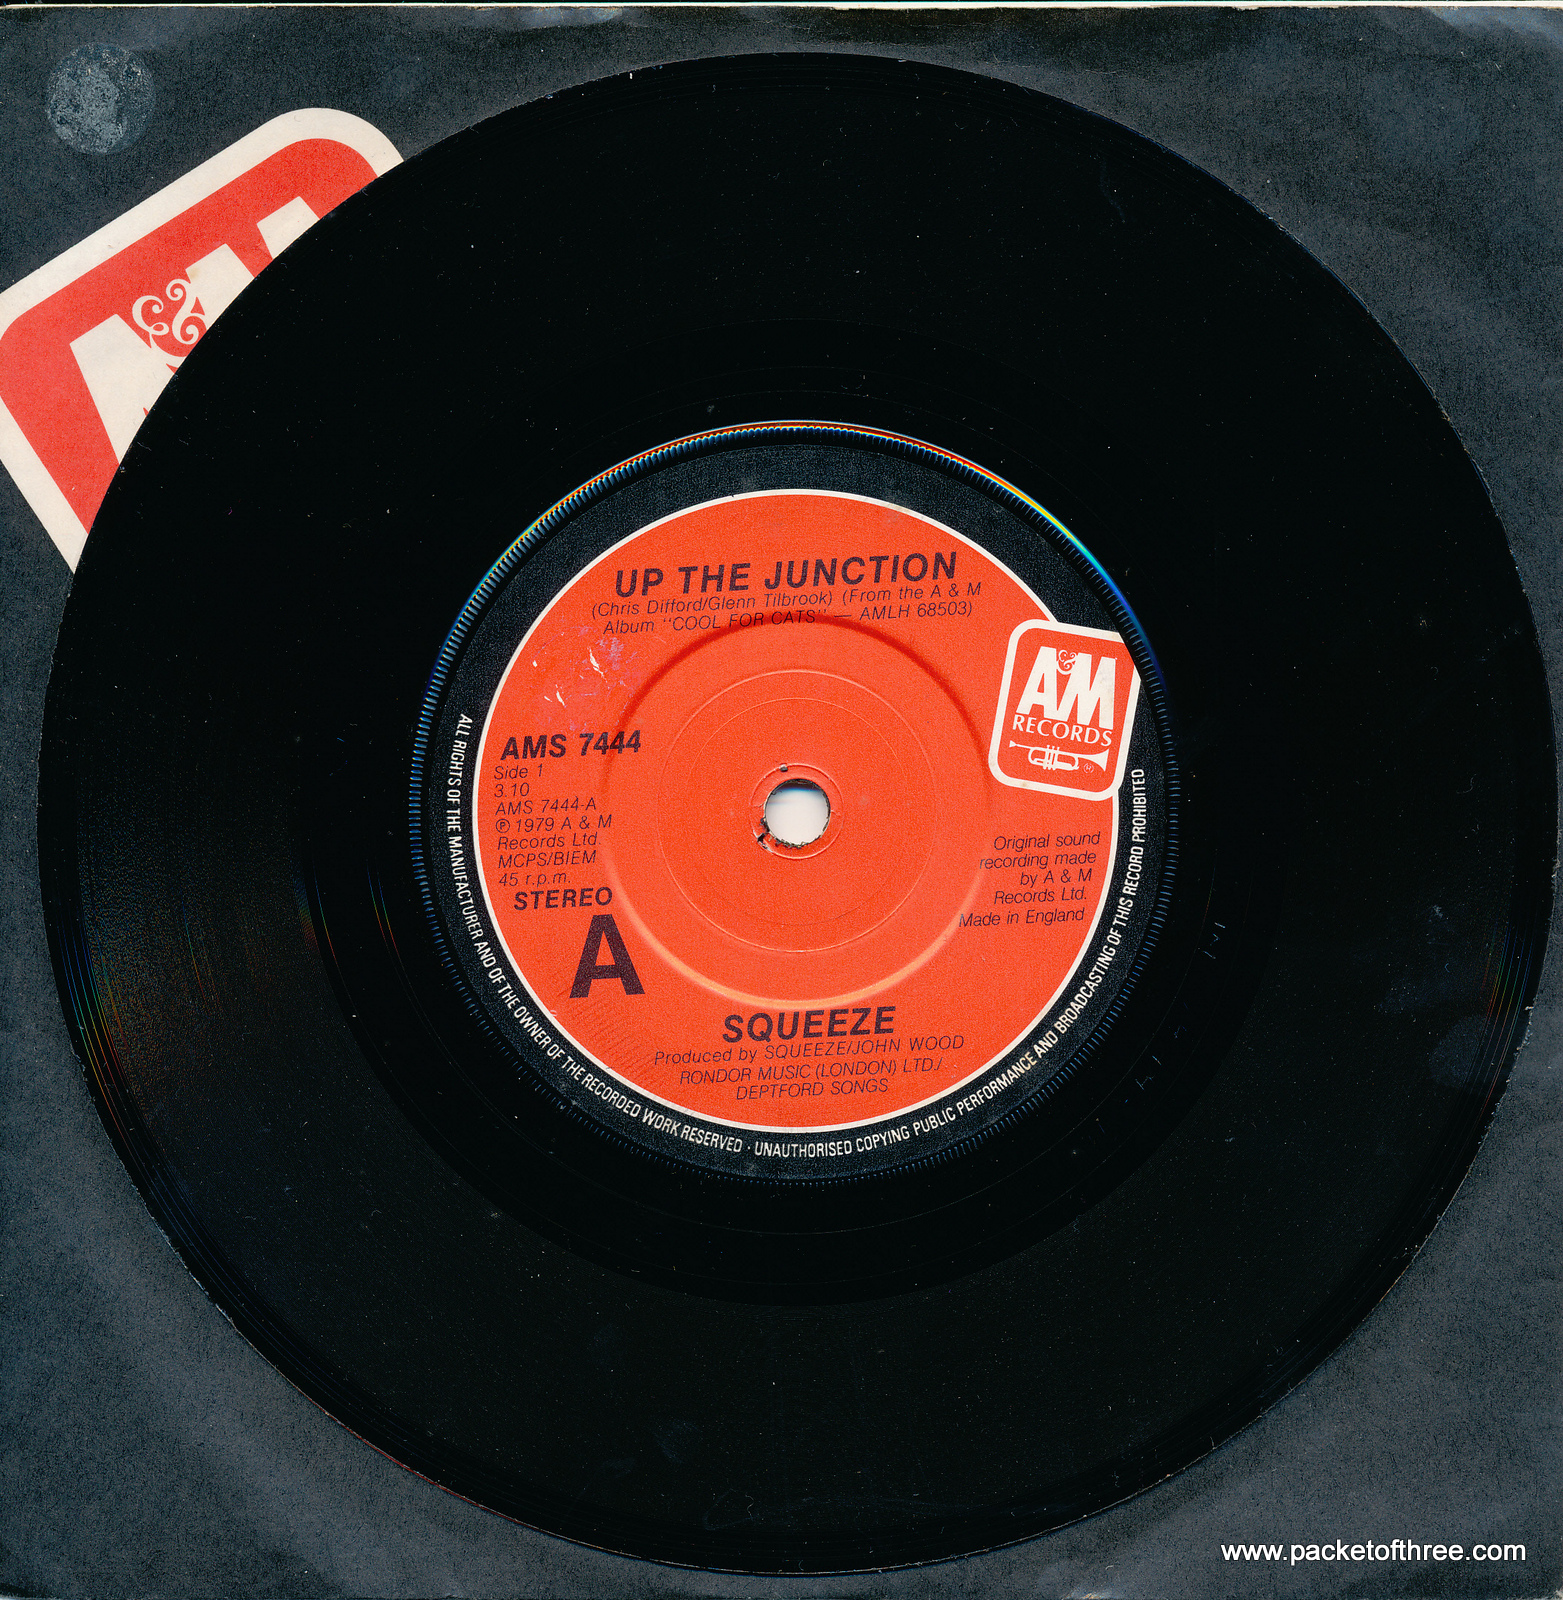 Up the Junction - UK - 7" - red label